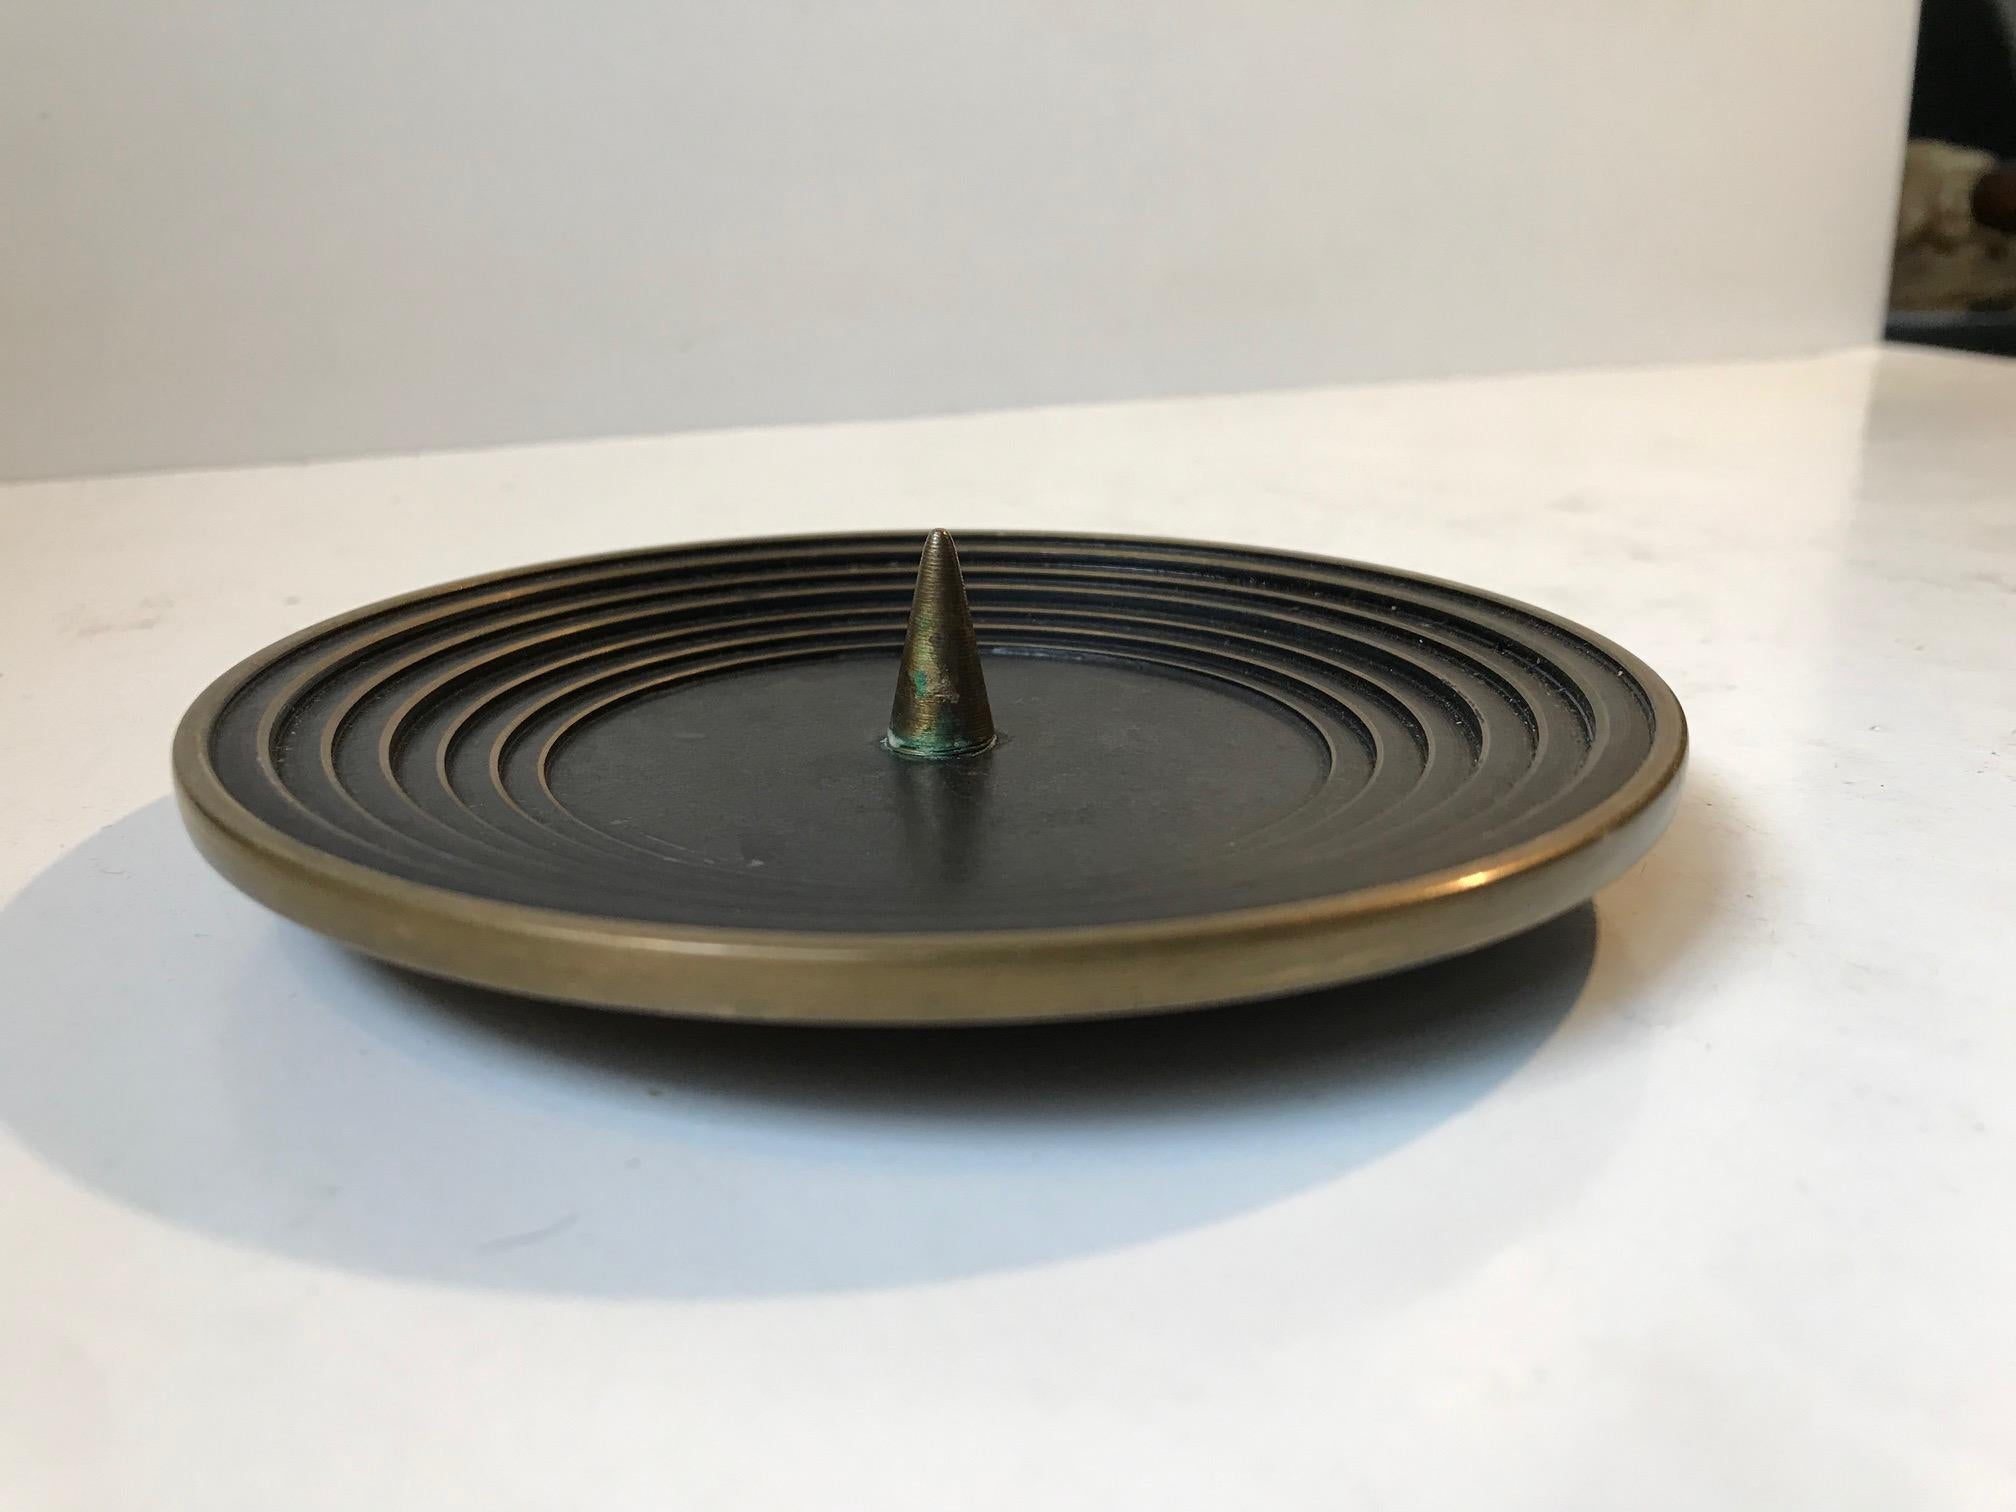 Shallow and stylish Art Deco candleholder for Church or bloc candles. Architectural feature with its 'staired' design. Manufactured in Denmark during the 1930s in a style reminiscent of Just Andersen.